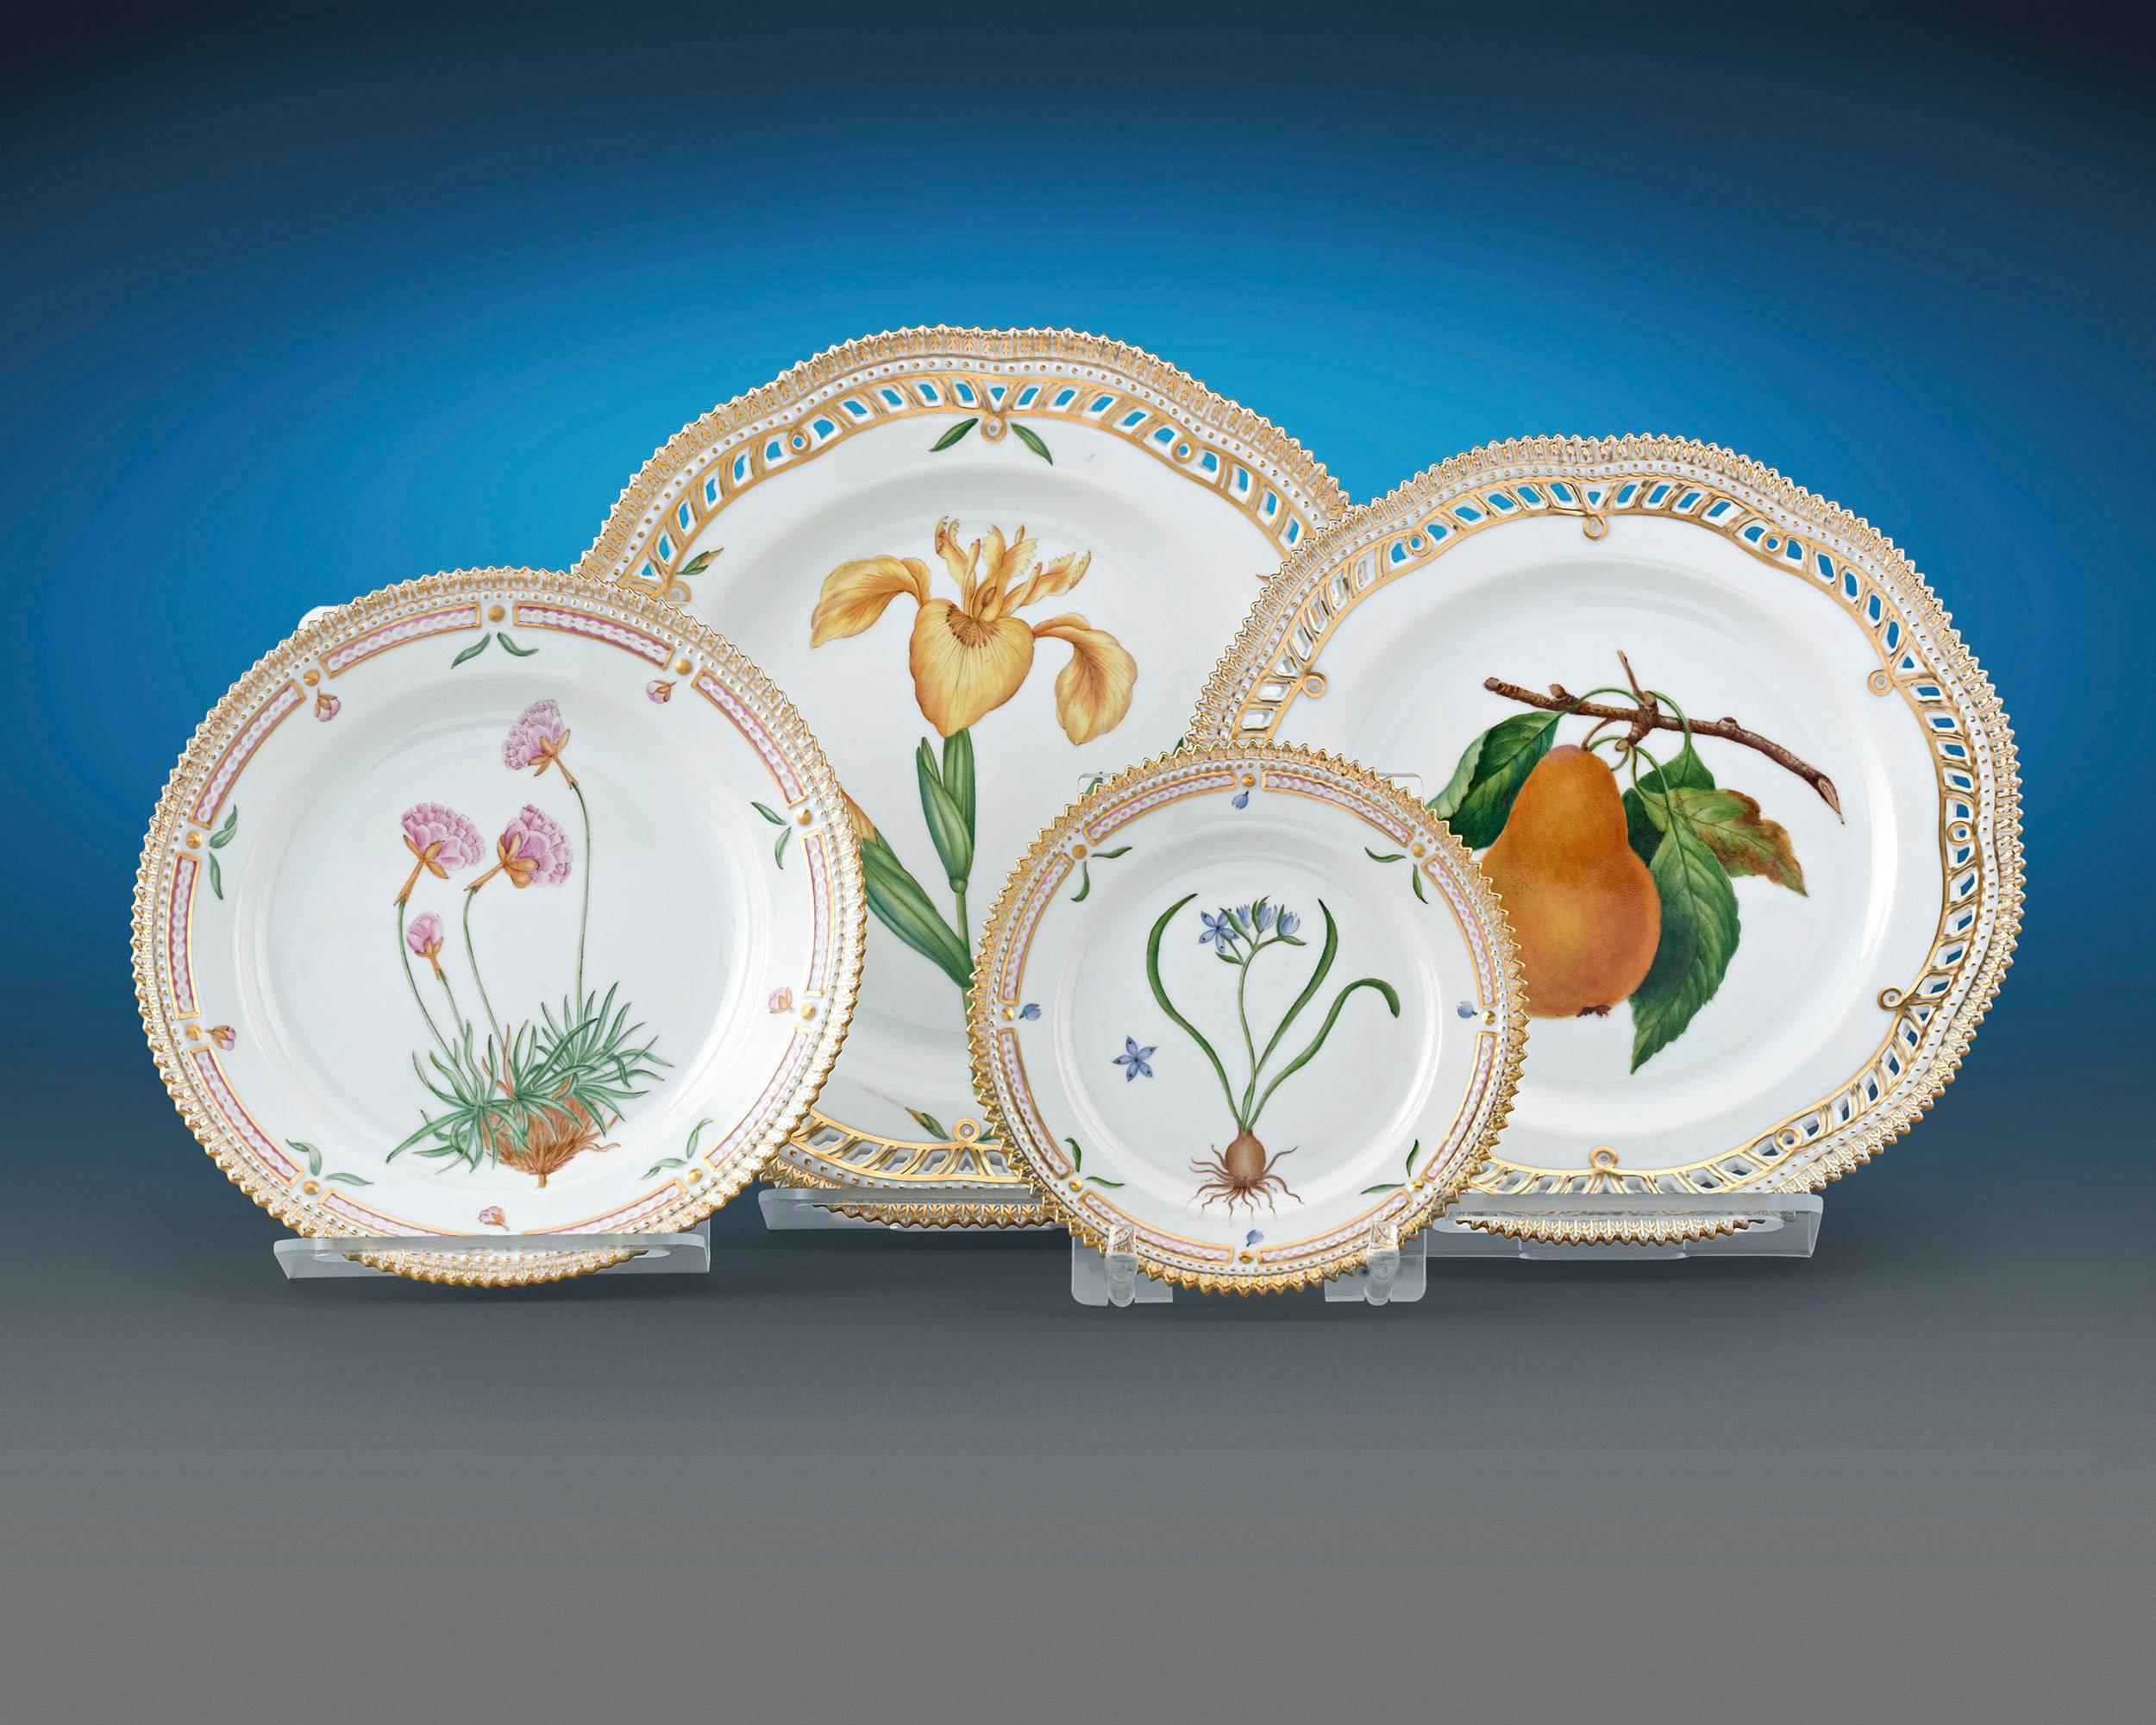 This remarkable 119-piece Flora Danica dinner service was crafted by the Royal Copenhagen Porcelain Manufactory. From the rich, hand-painted botanical motifs to the delicate rose accents, each piece in this set reflects the meticulous skill and